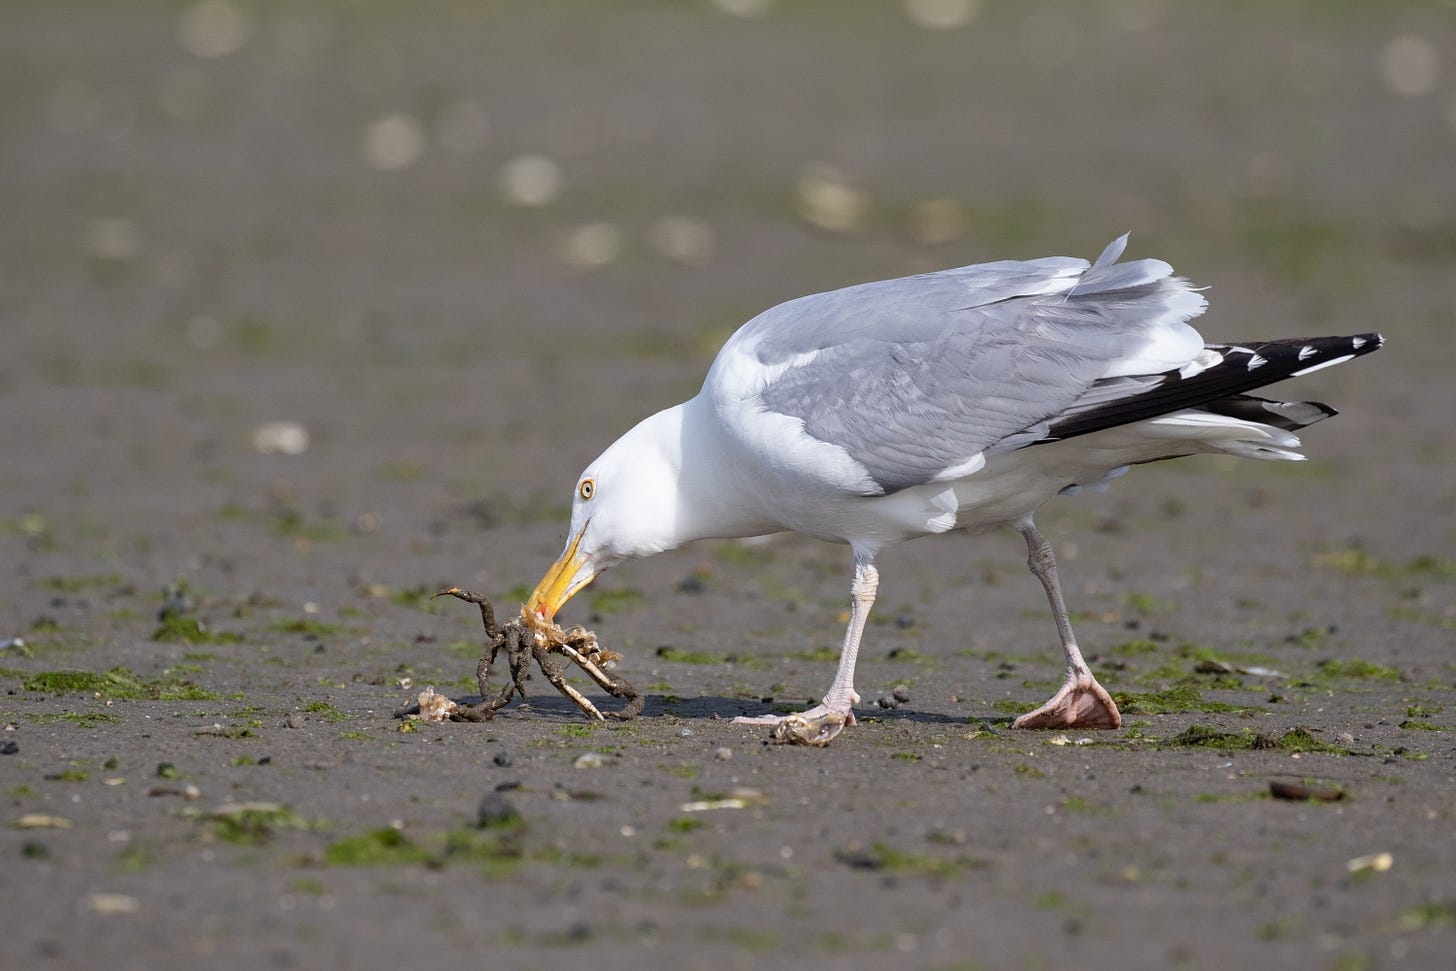 a white bird with gray wings and black wingtips walking on the sand facing left with most of a crab in its mouth